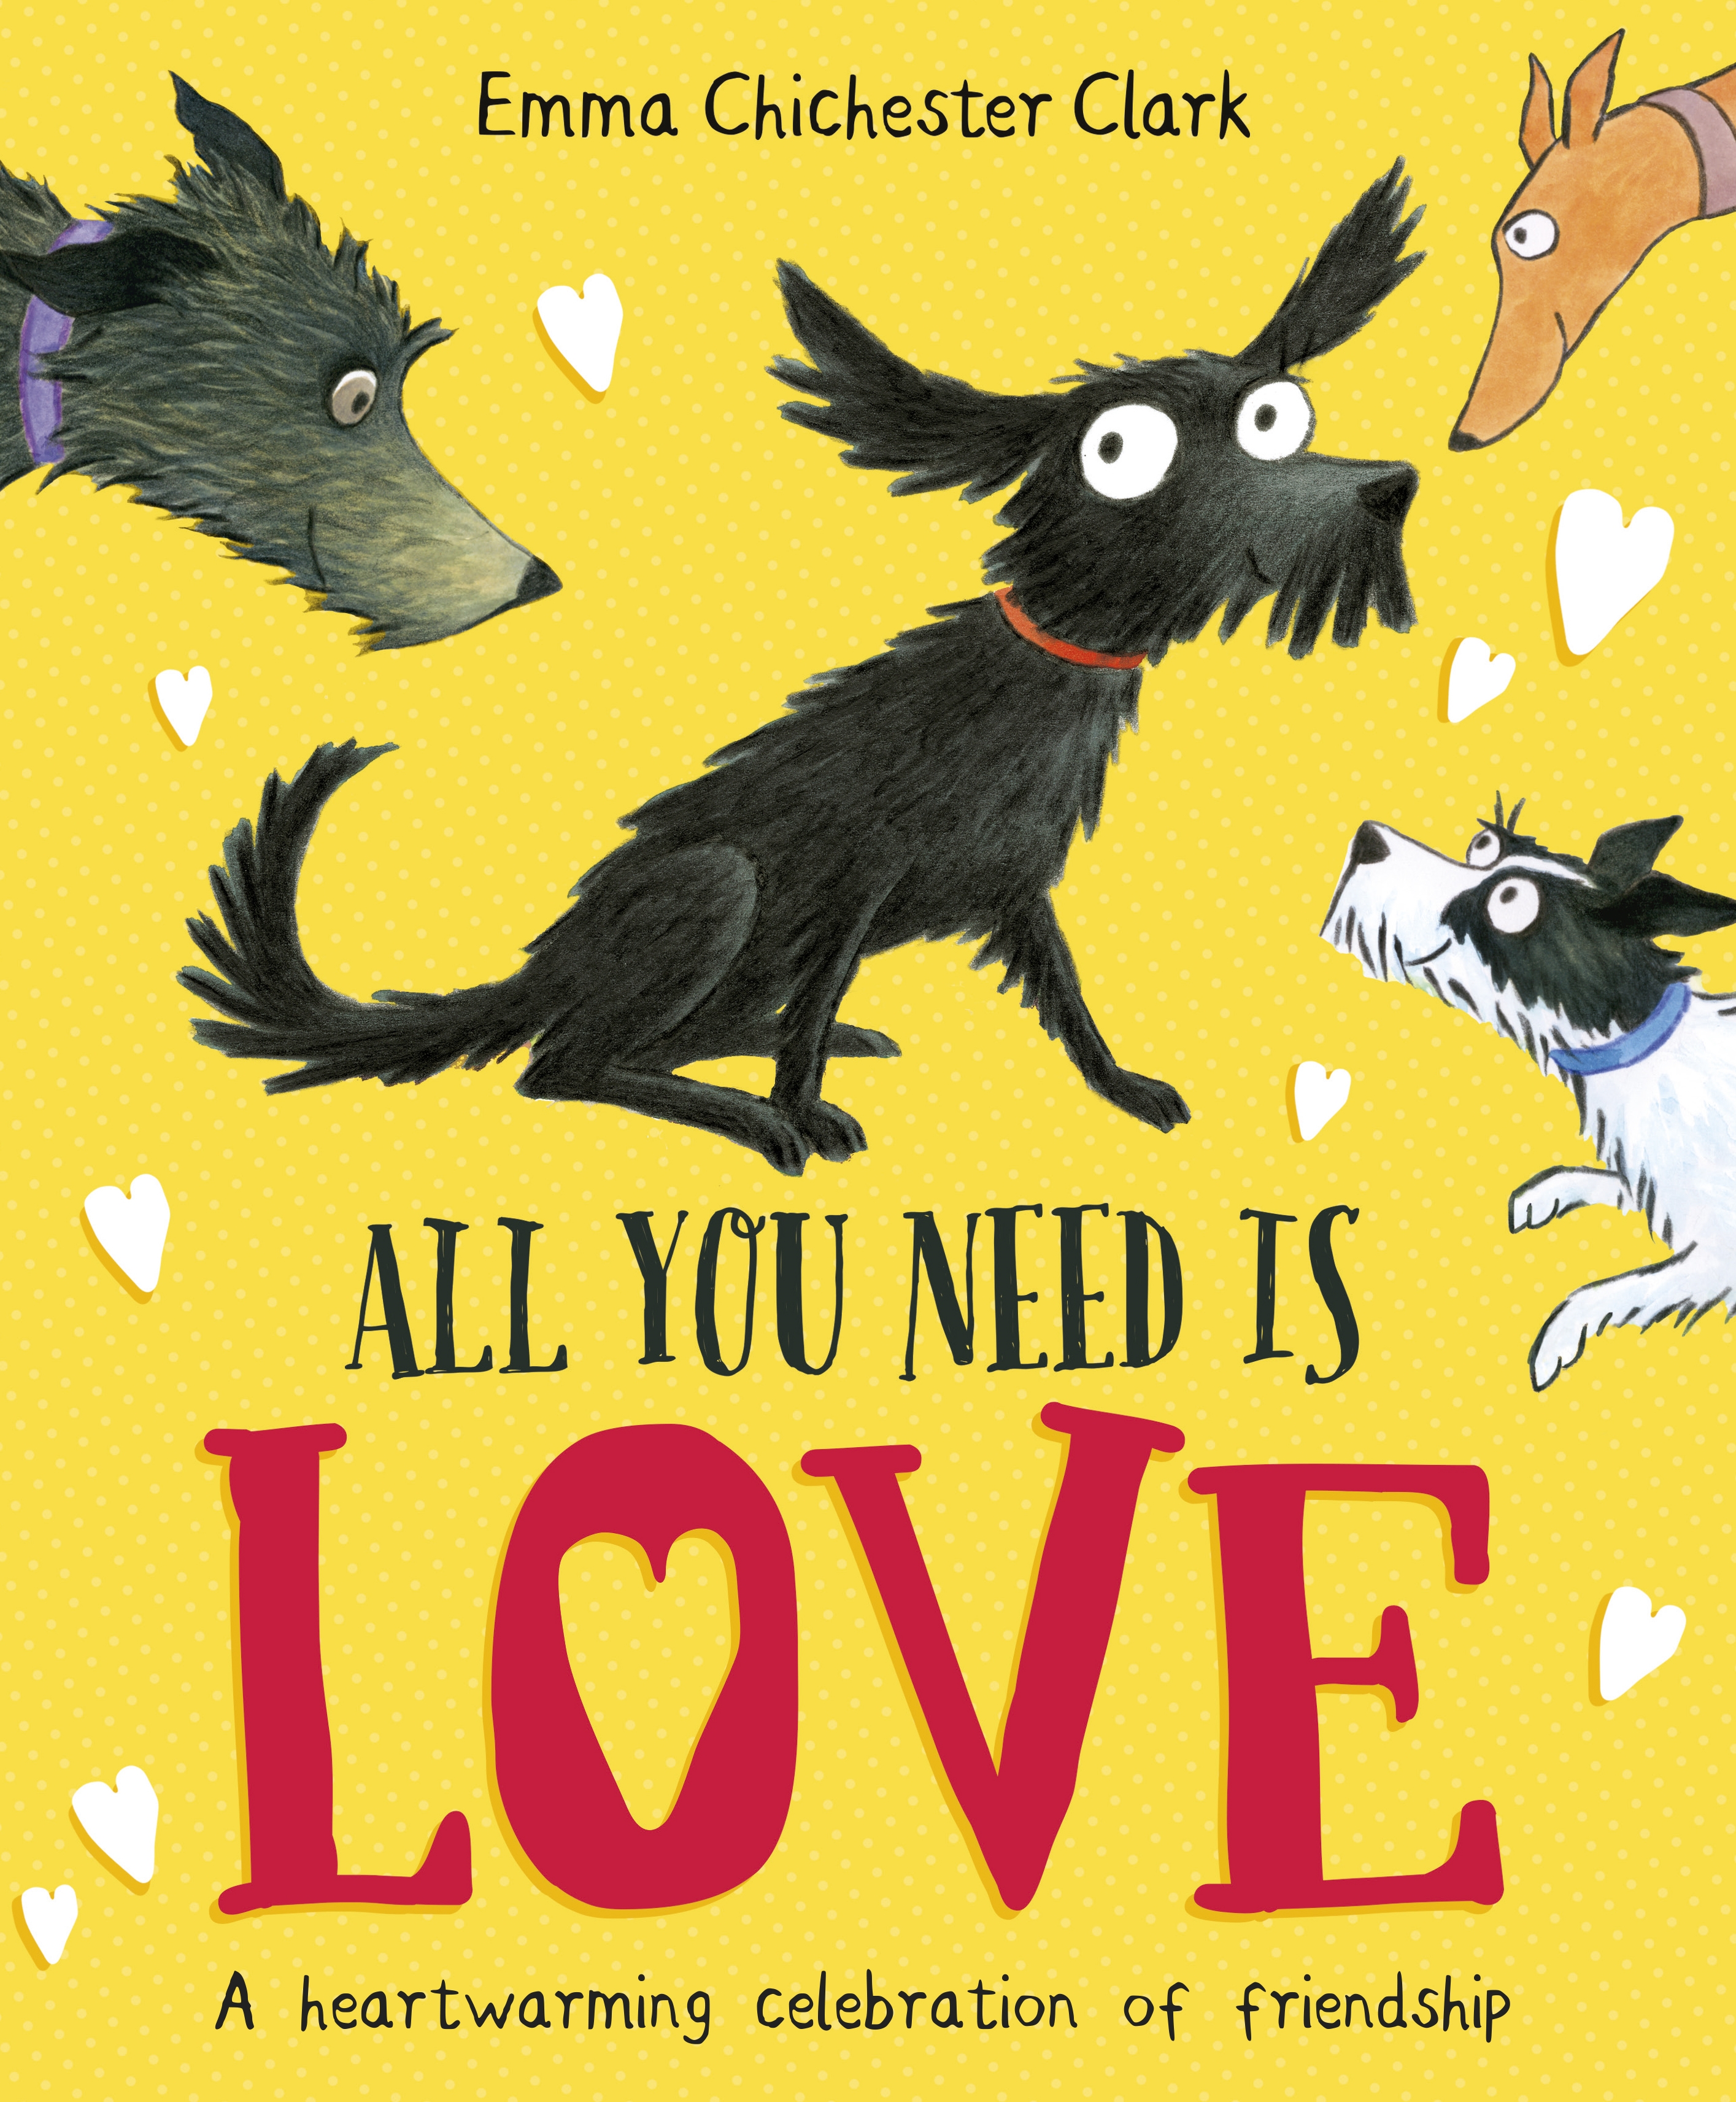 all-you-need-is-love-by-emma-chichester-clark-penguin-books-new-zealand